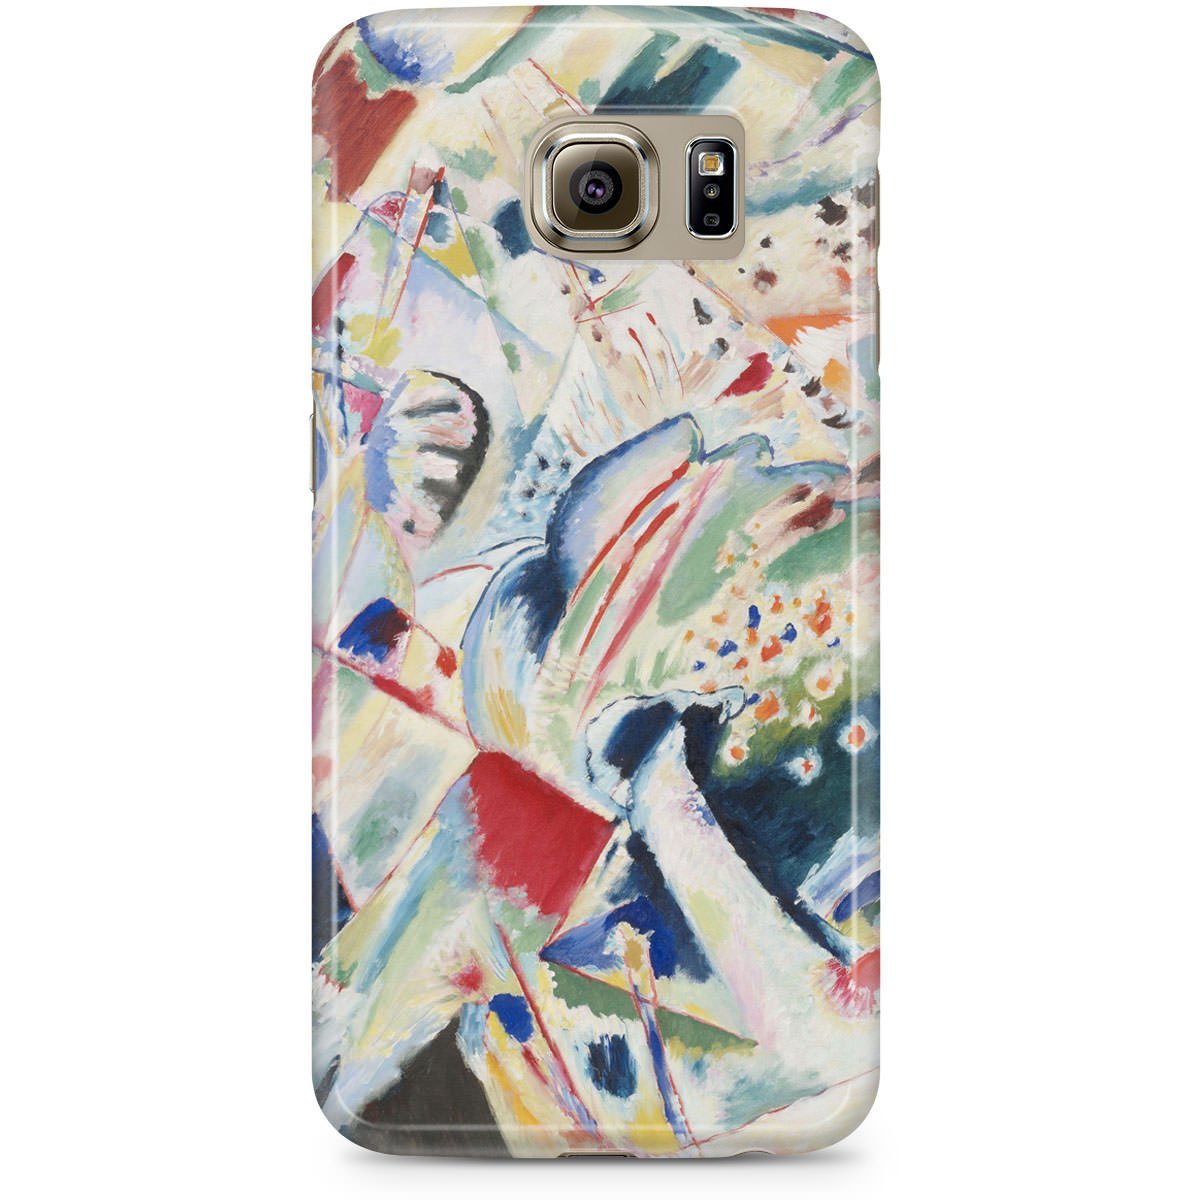 Queen of Cases Hard Shell Phone Case - Kandinsky Abstract Art Painting